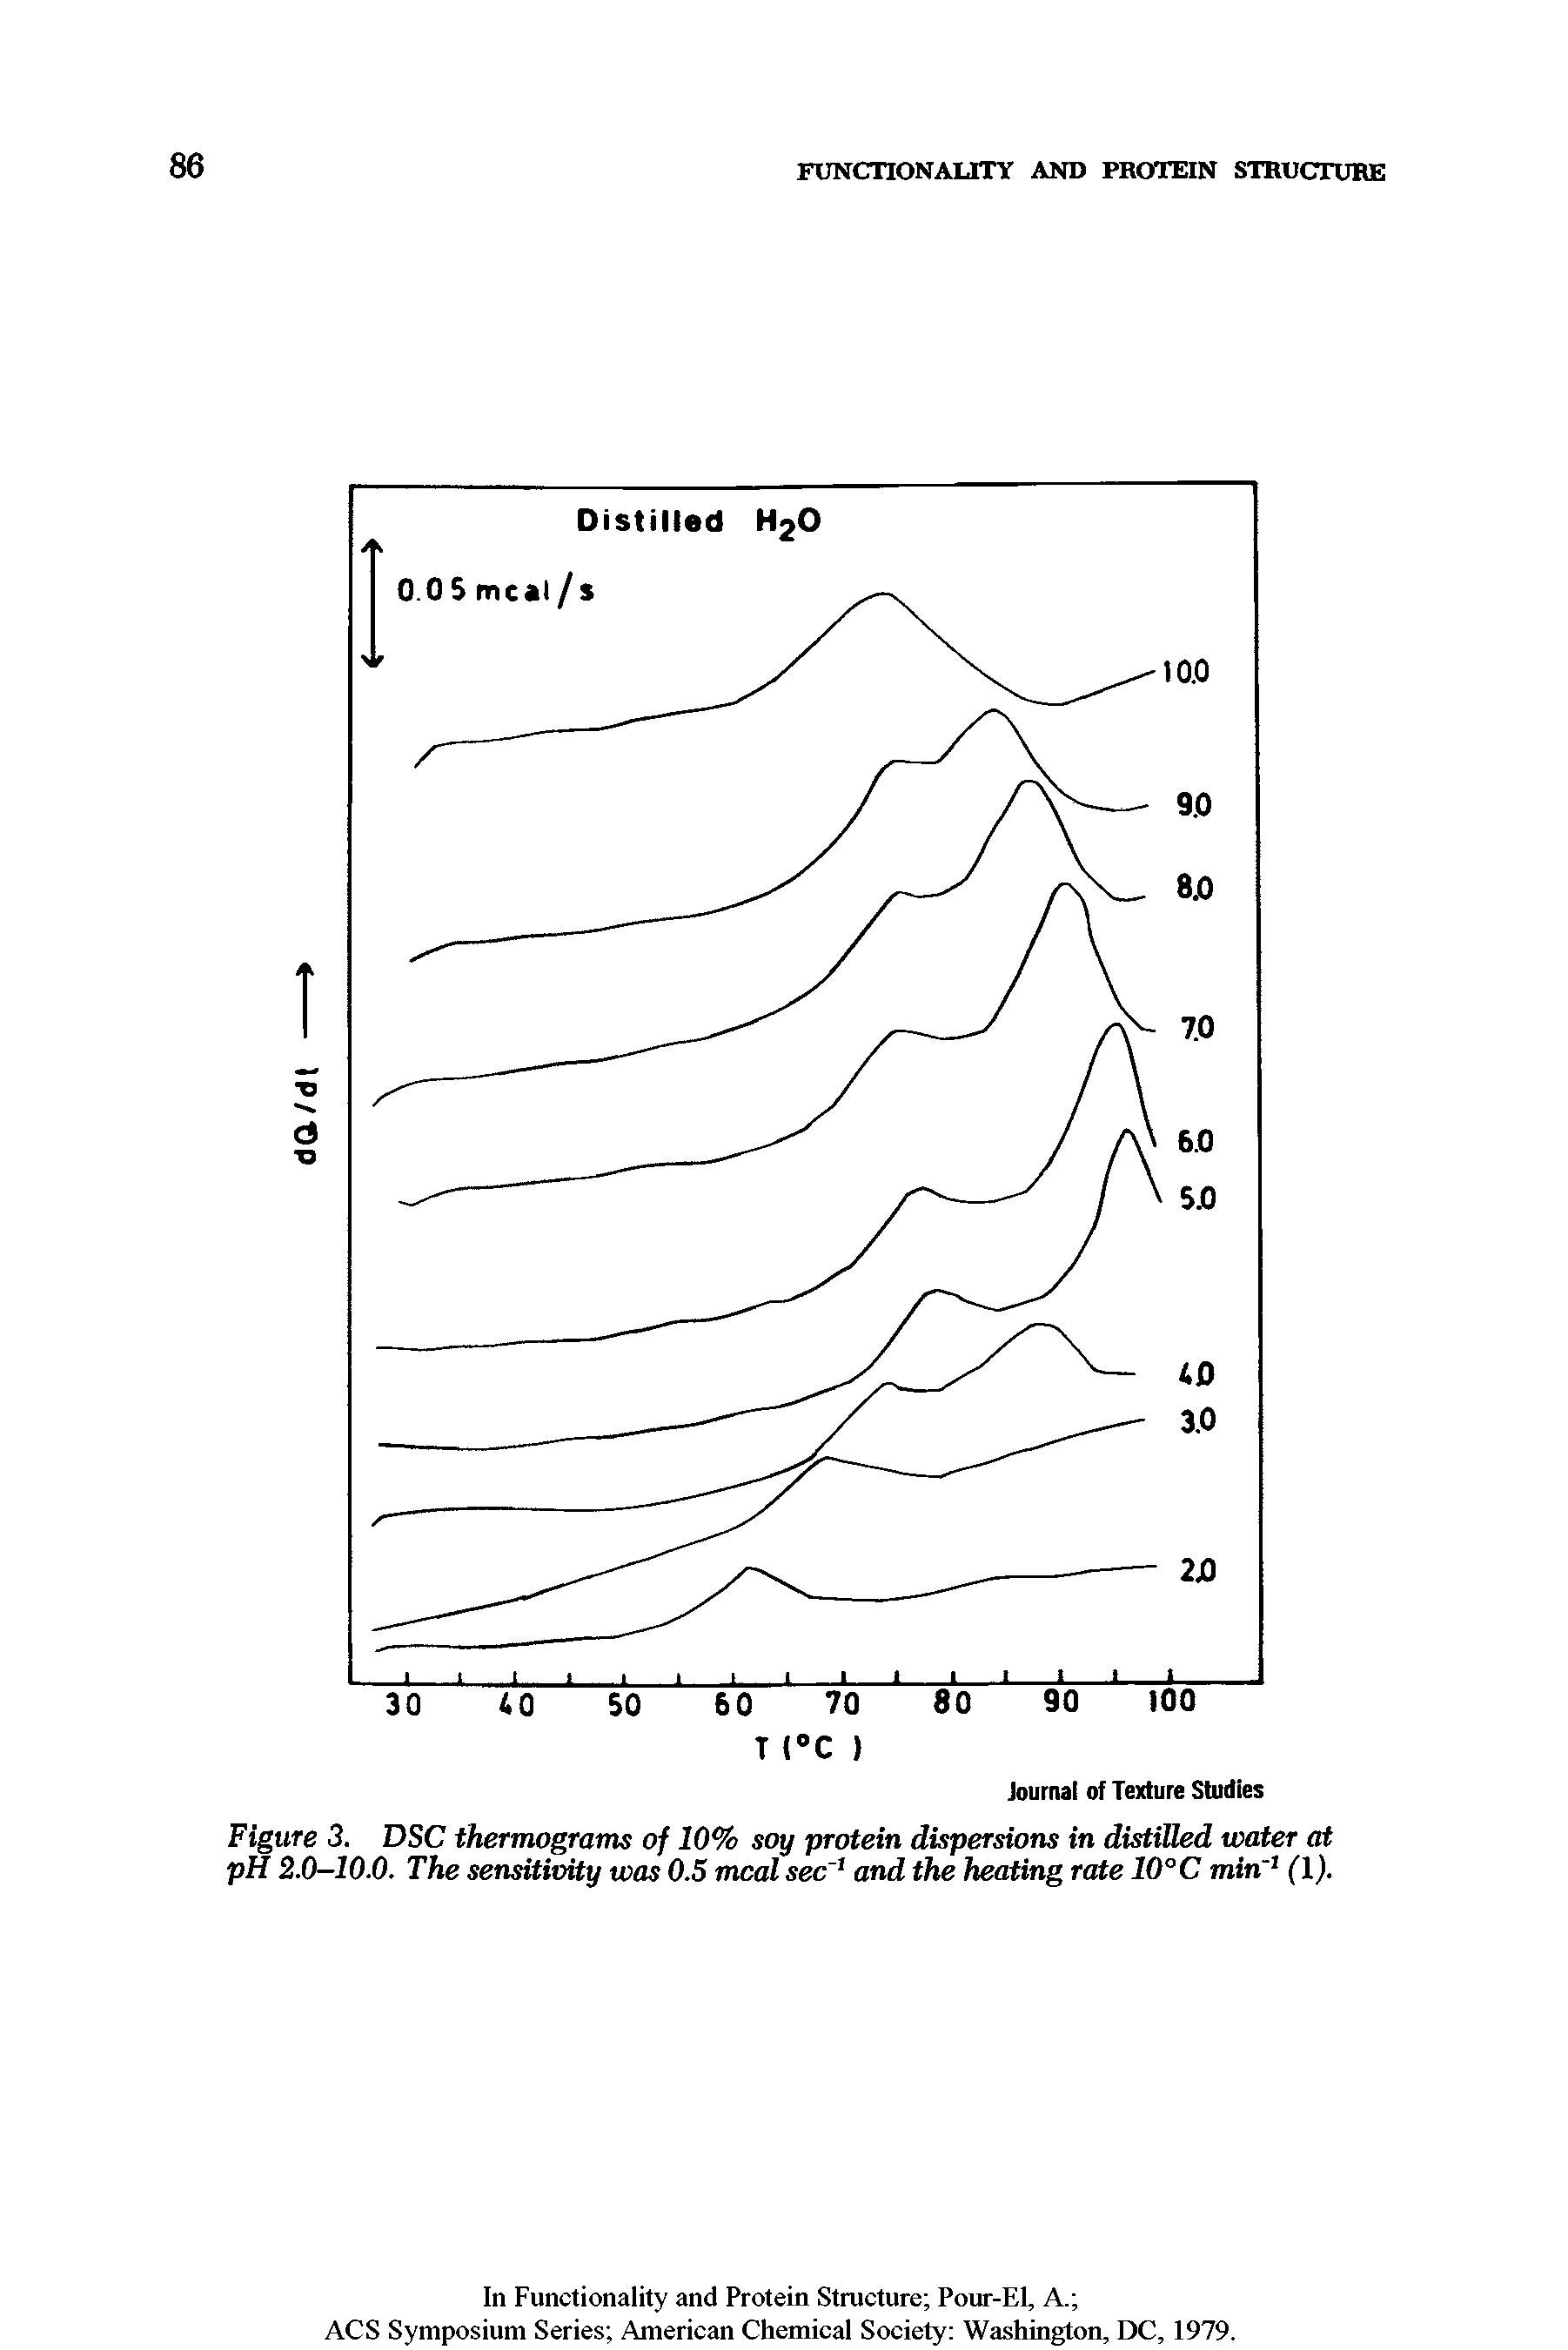 Figure 3. DSC thermograms of 10% soy protein dispersions in distilled water at pH 2.0—10.0. The sensitivity was 0.5 meal sec 1 and the heating rate 10°C min1 (1).